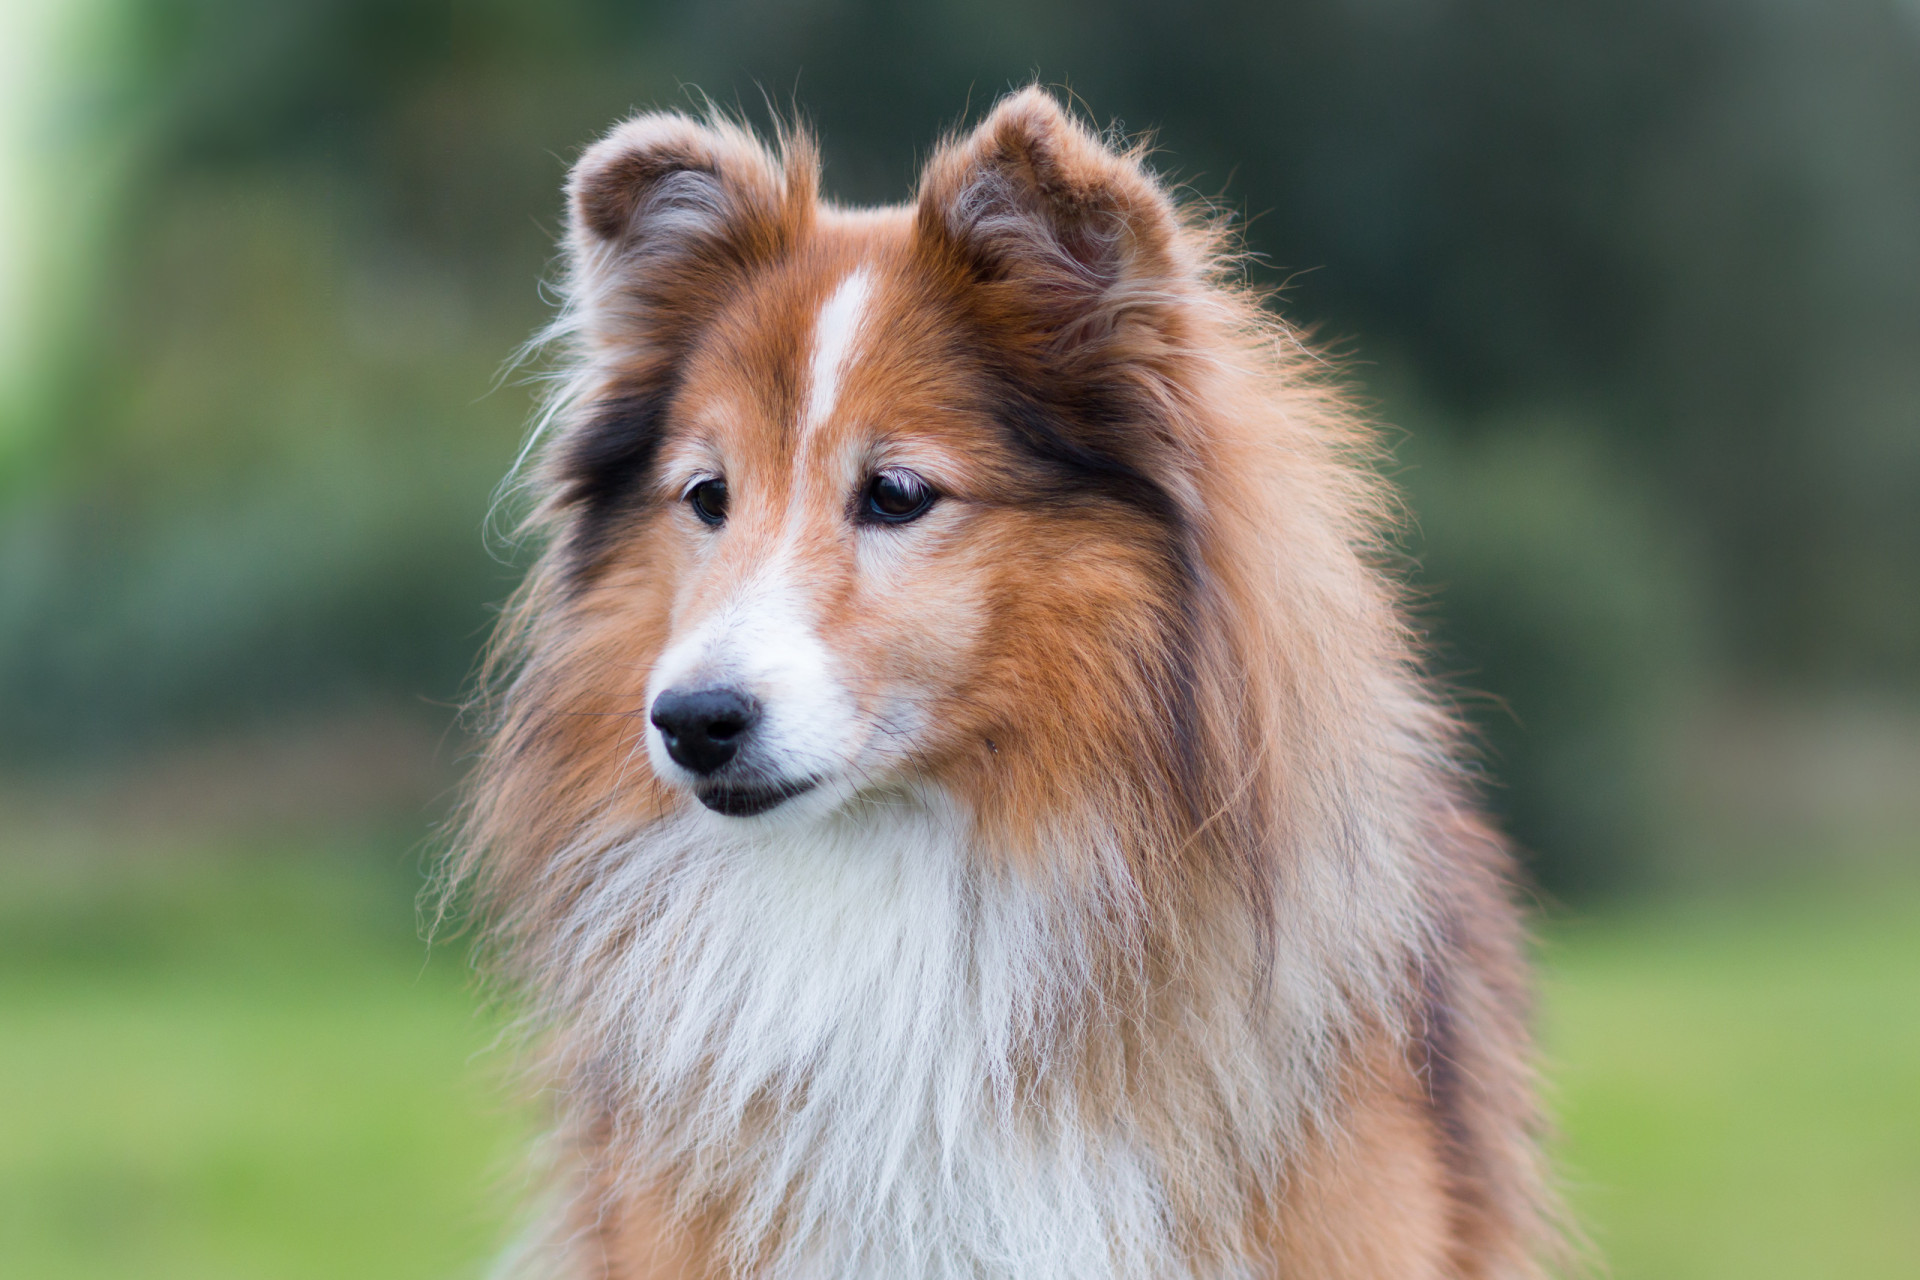 <p>Also known as Sheltie, this breed is an intelligent problem solver. A great all around dog, they live about 13 years. </p><p><a href="https://www.msn.com/en-us/community/channel/vid-7xx8mnucu55yw63we9va2gwr7uihbxwc68fxqp25x6tg4ftibpra?cvid=94631541bc0f4f89bfd59158d696ad7e">Follow us and access great exclusive content every day</a></p>